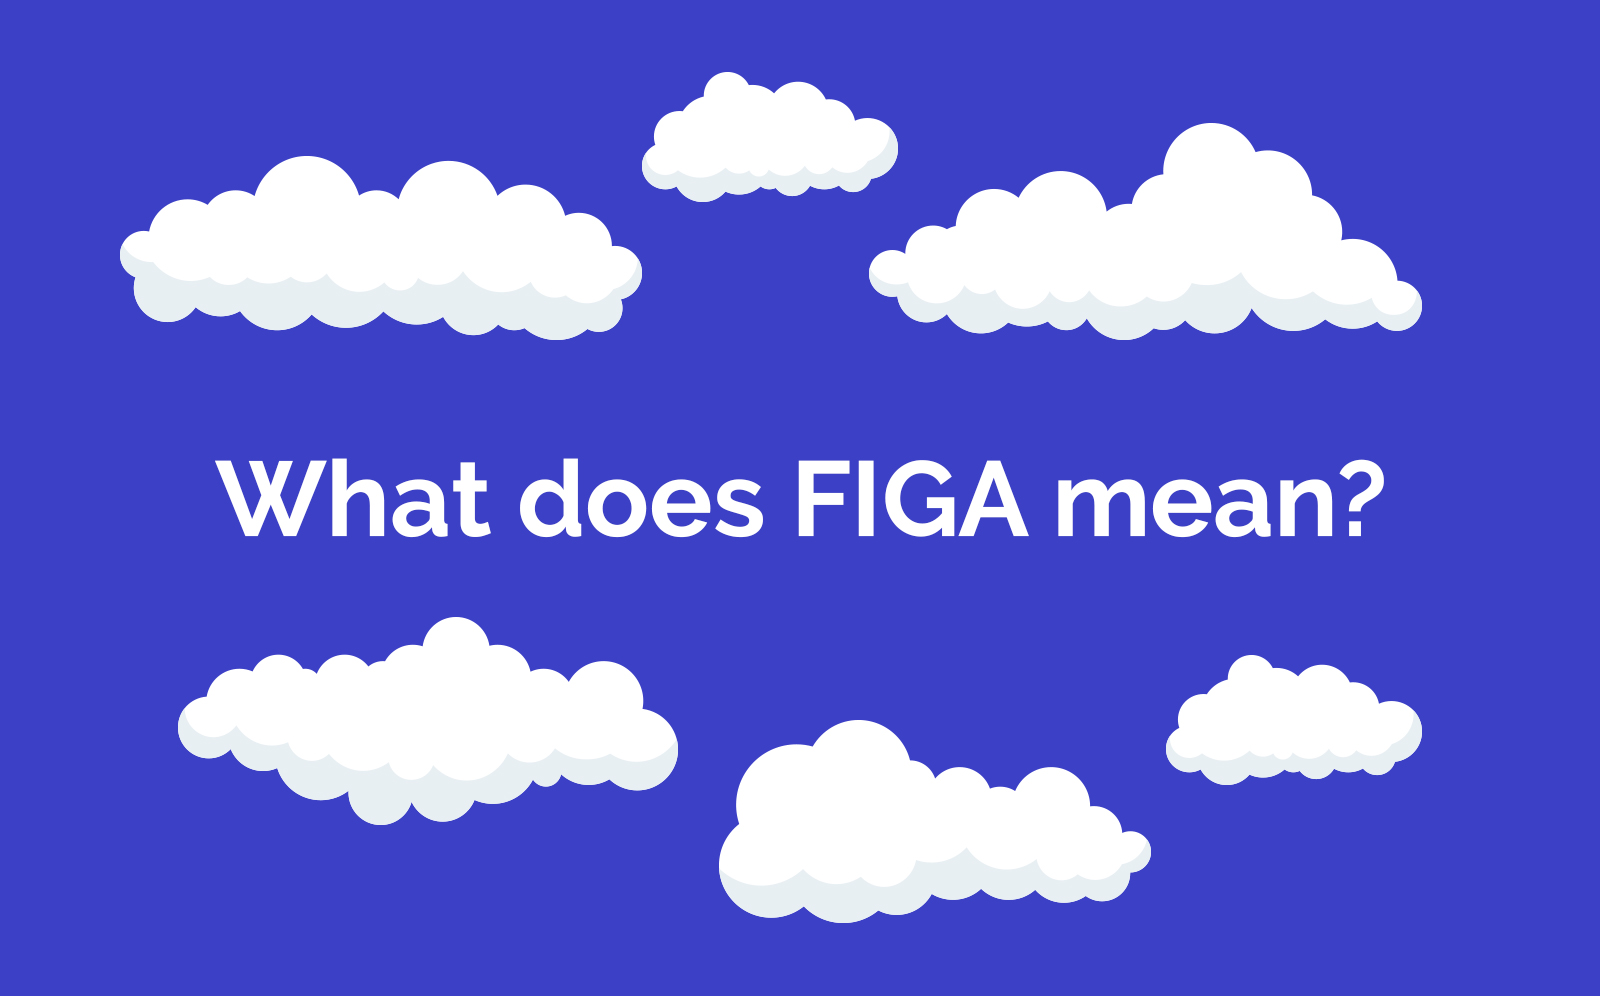 What does FIGA mean?